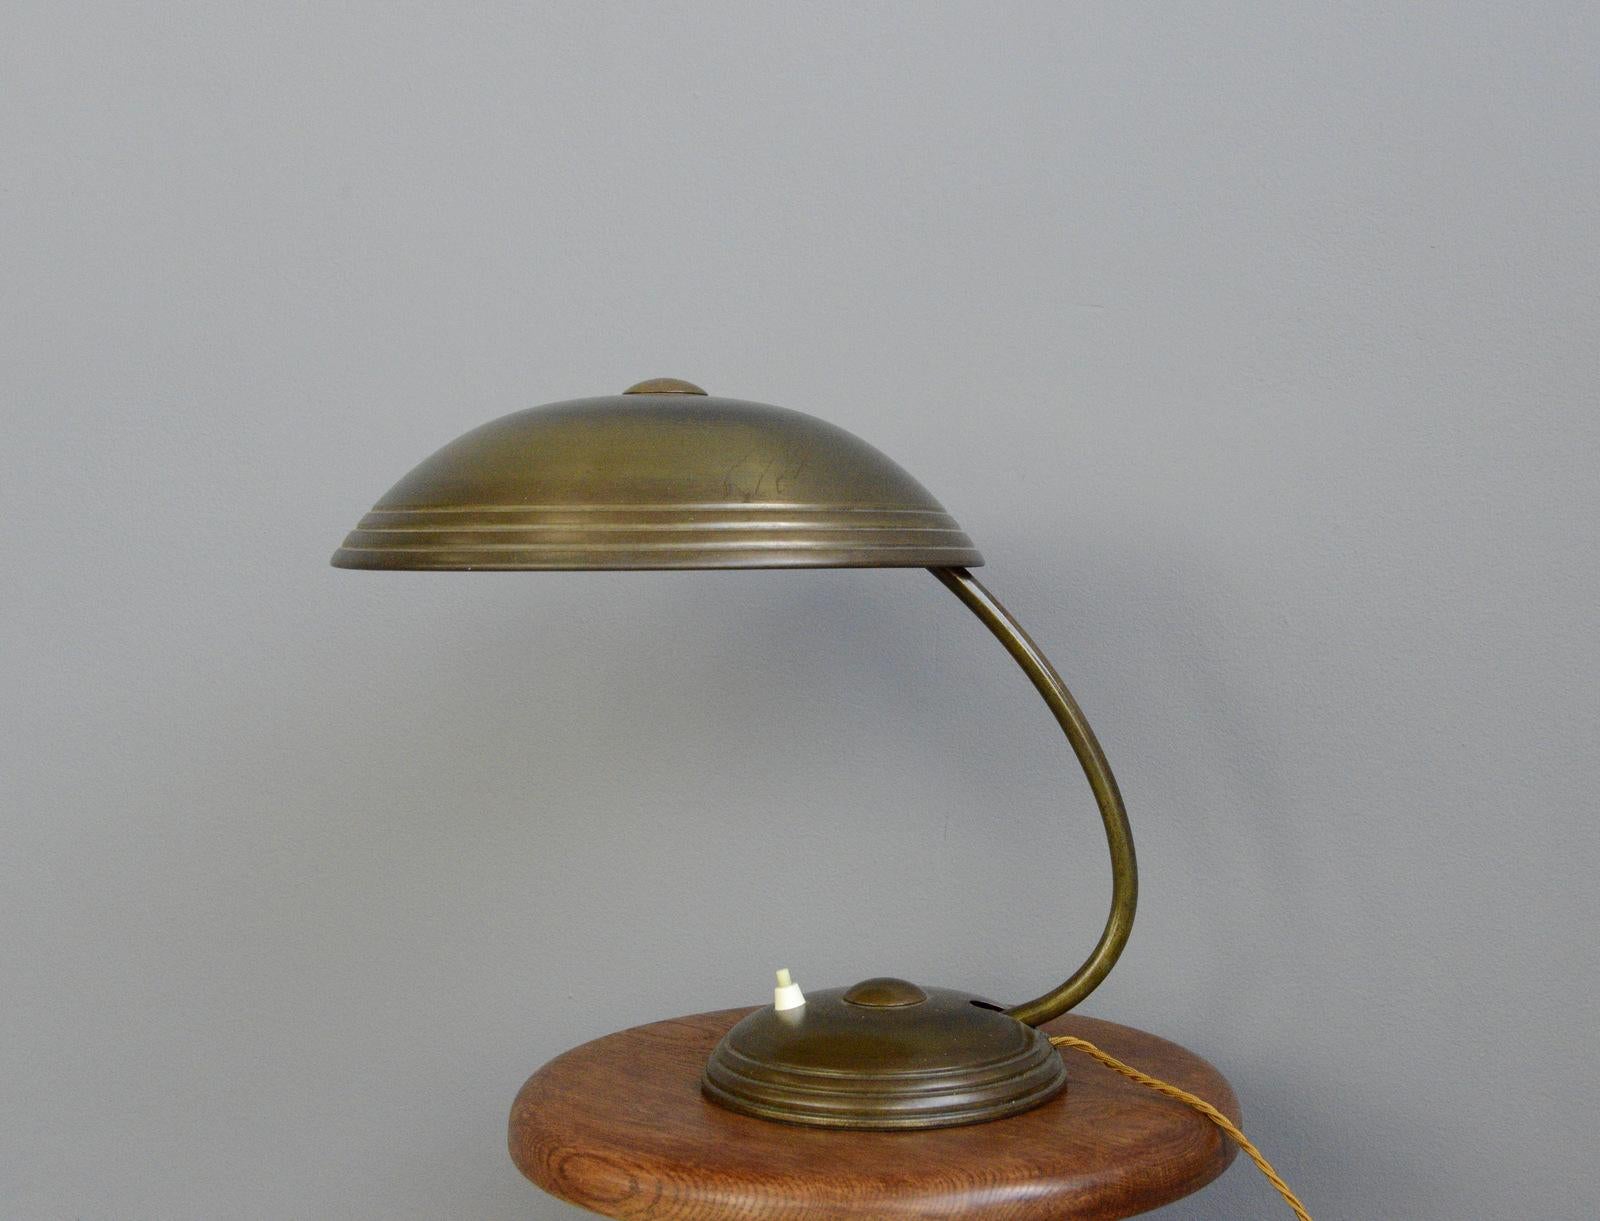 Brass table lamp by Helo, circa 1940s

- Solid brass arm, shade and base
- Original push button switch
- Takes E27 fitting bulbs
- Made by Helo, Nueberg
- German, late 1940s
- Measures: 35cm tall x 33cm wide x 43cm deep

Condition